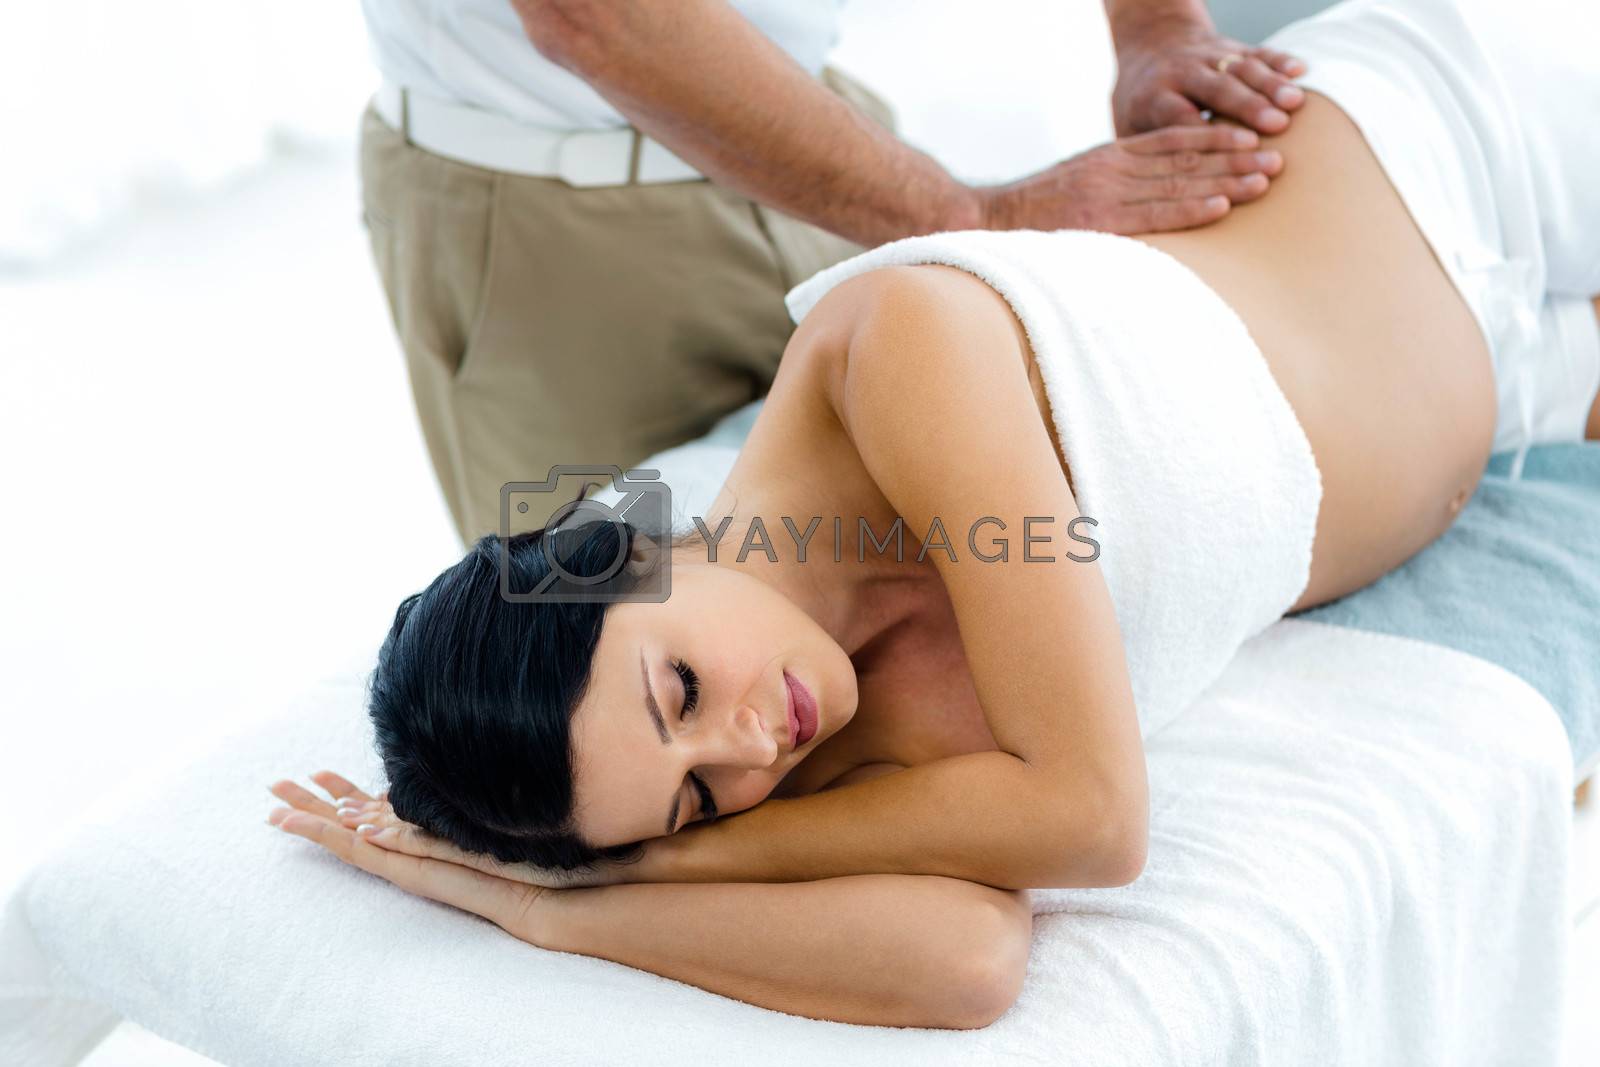 Royalty free image of Pregnant woman receiving a back massage from masseur by Wavebreakmedia